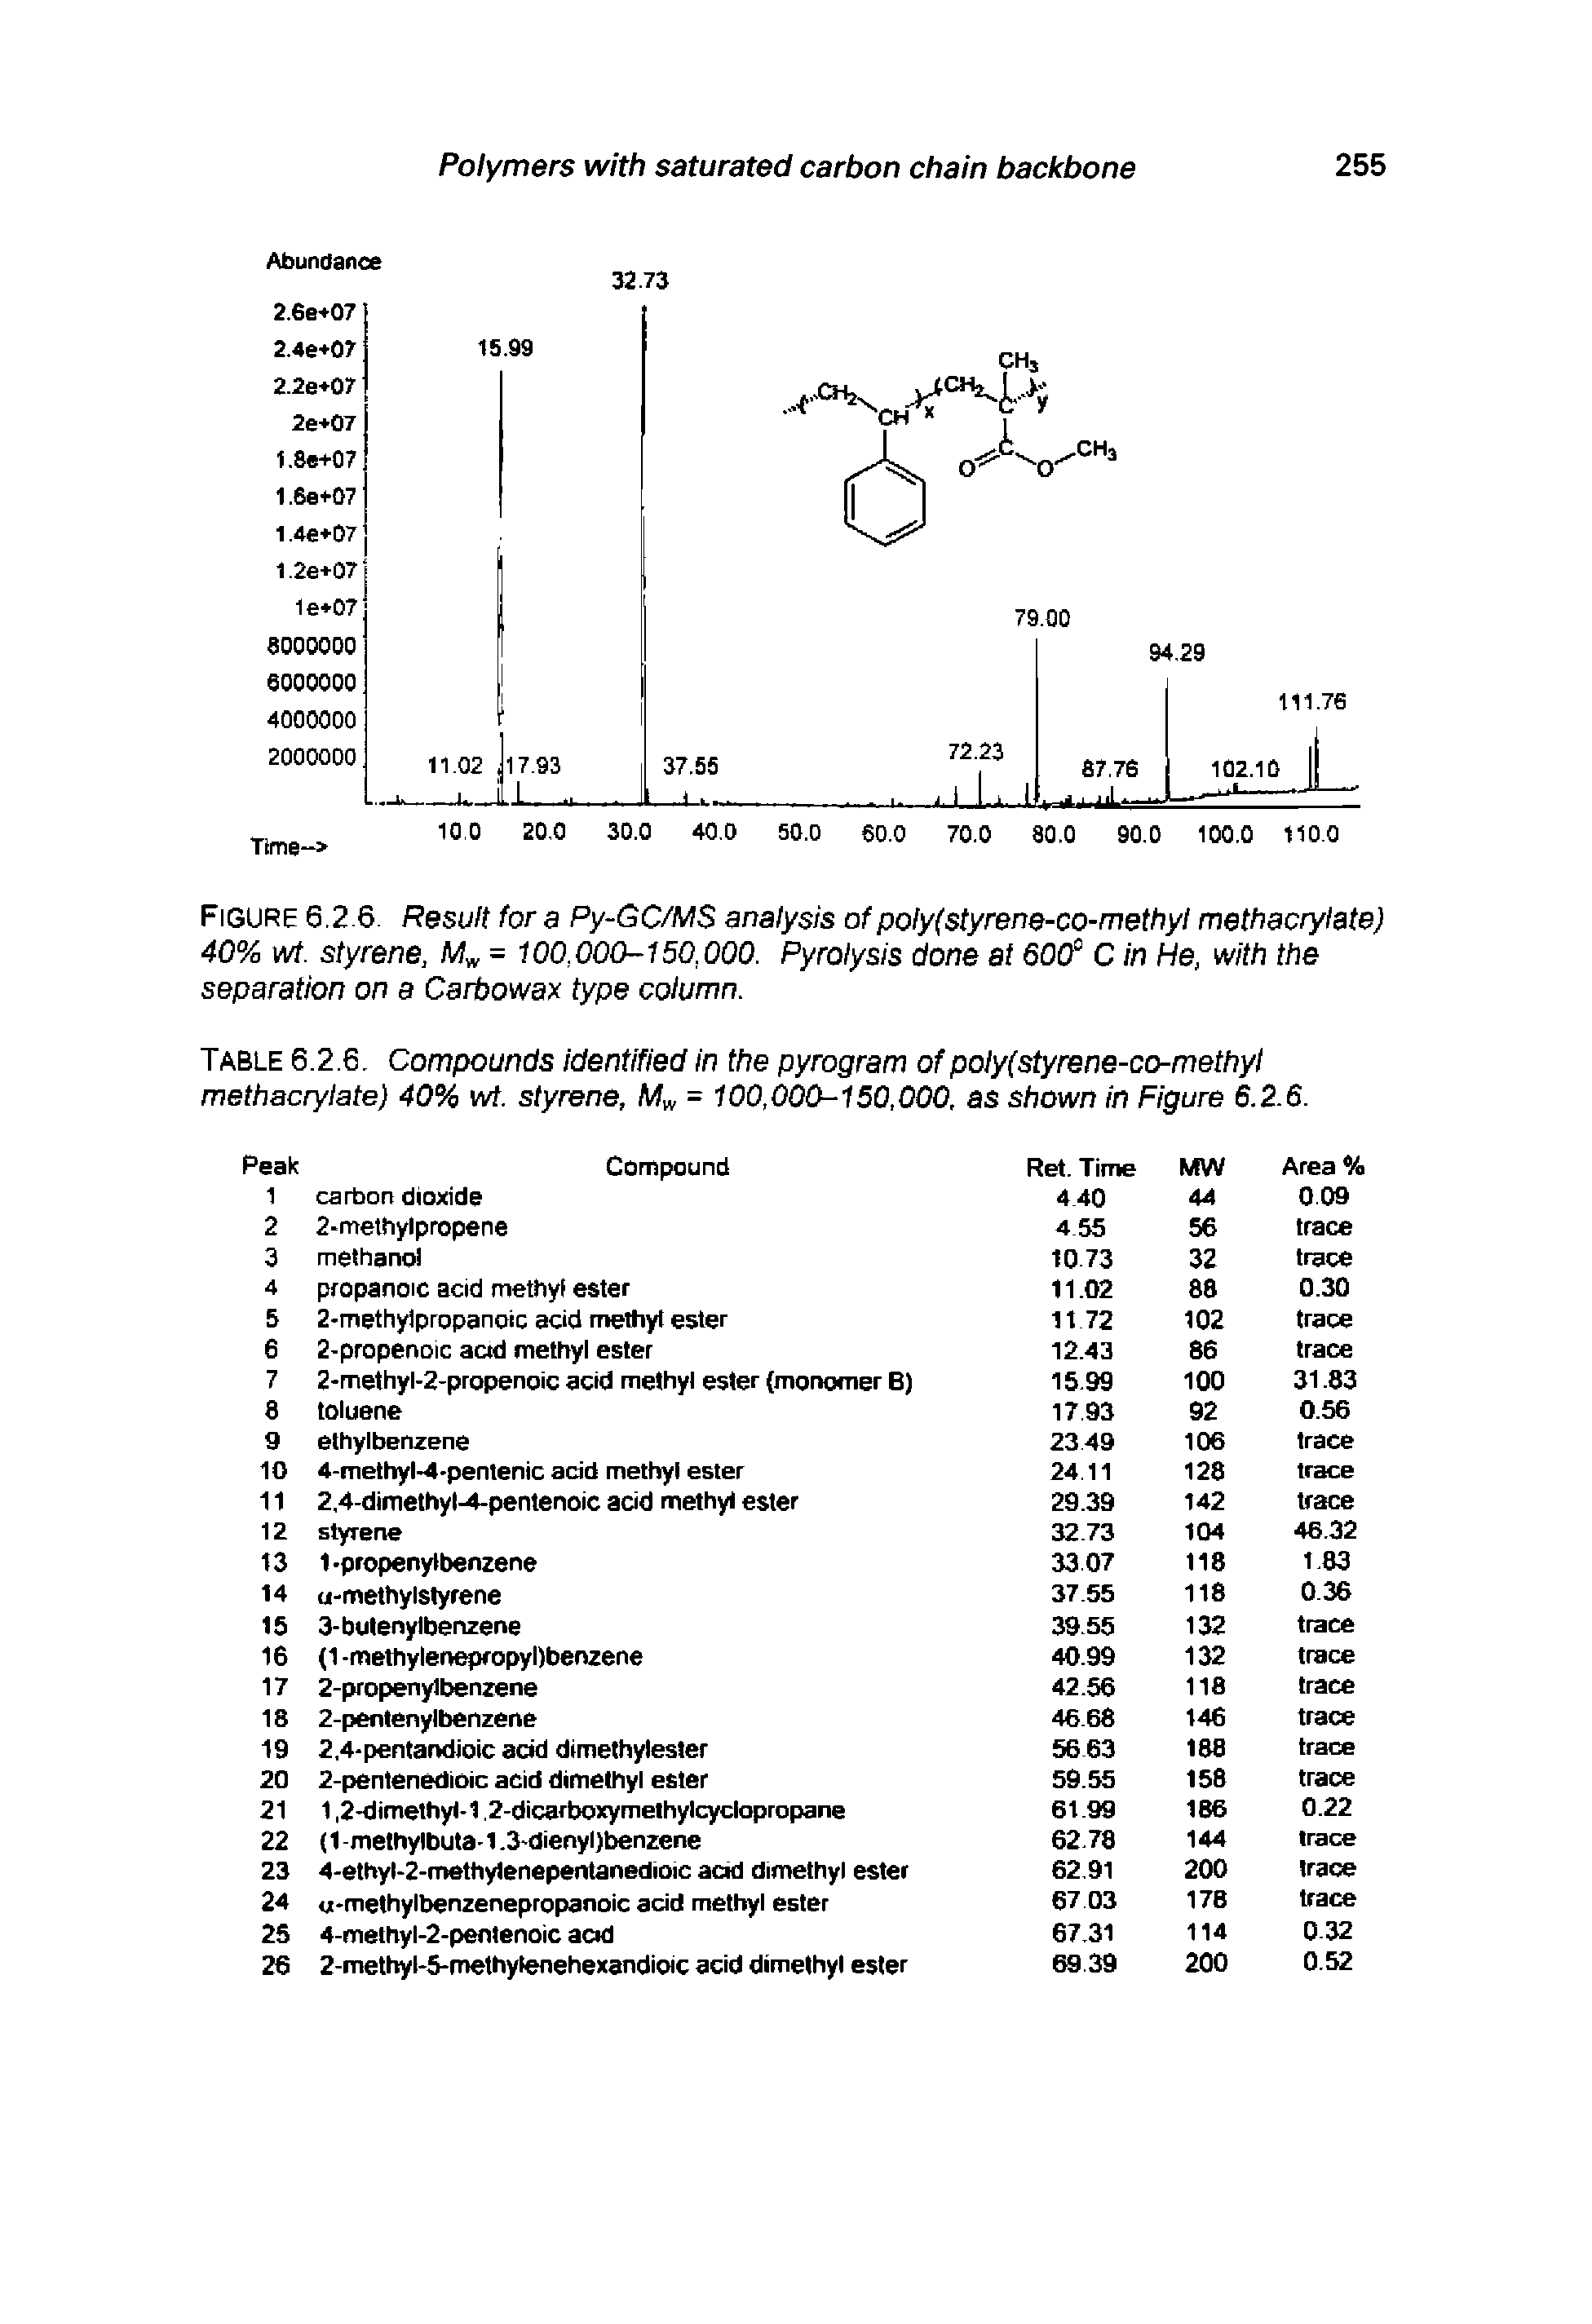 Table 6.2.6. Compounds identified in the pyrogram of poly(styrene-co-methyl methacrylate) 40% wt. styrene, = 100,000-150,000, as shown in Figure 6.2.6.